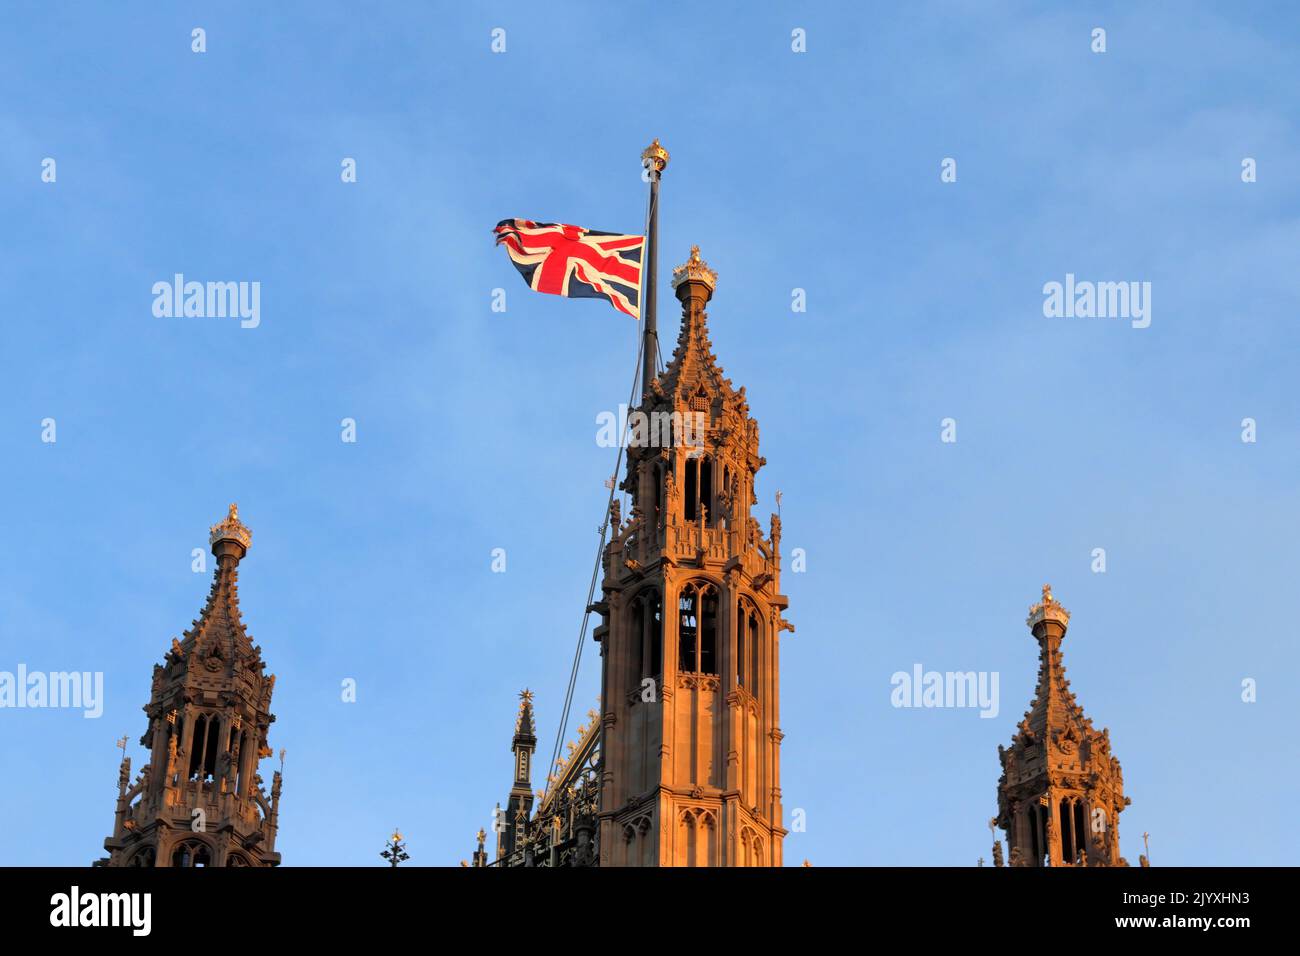 The Union Flag flying at half-mast on the Victoria Tower, tribute to Her Majesty the Queen Elizabeth II Stock Photo